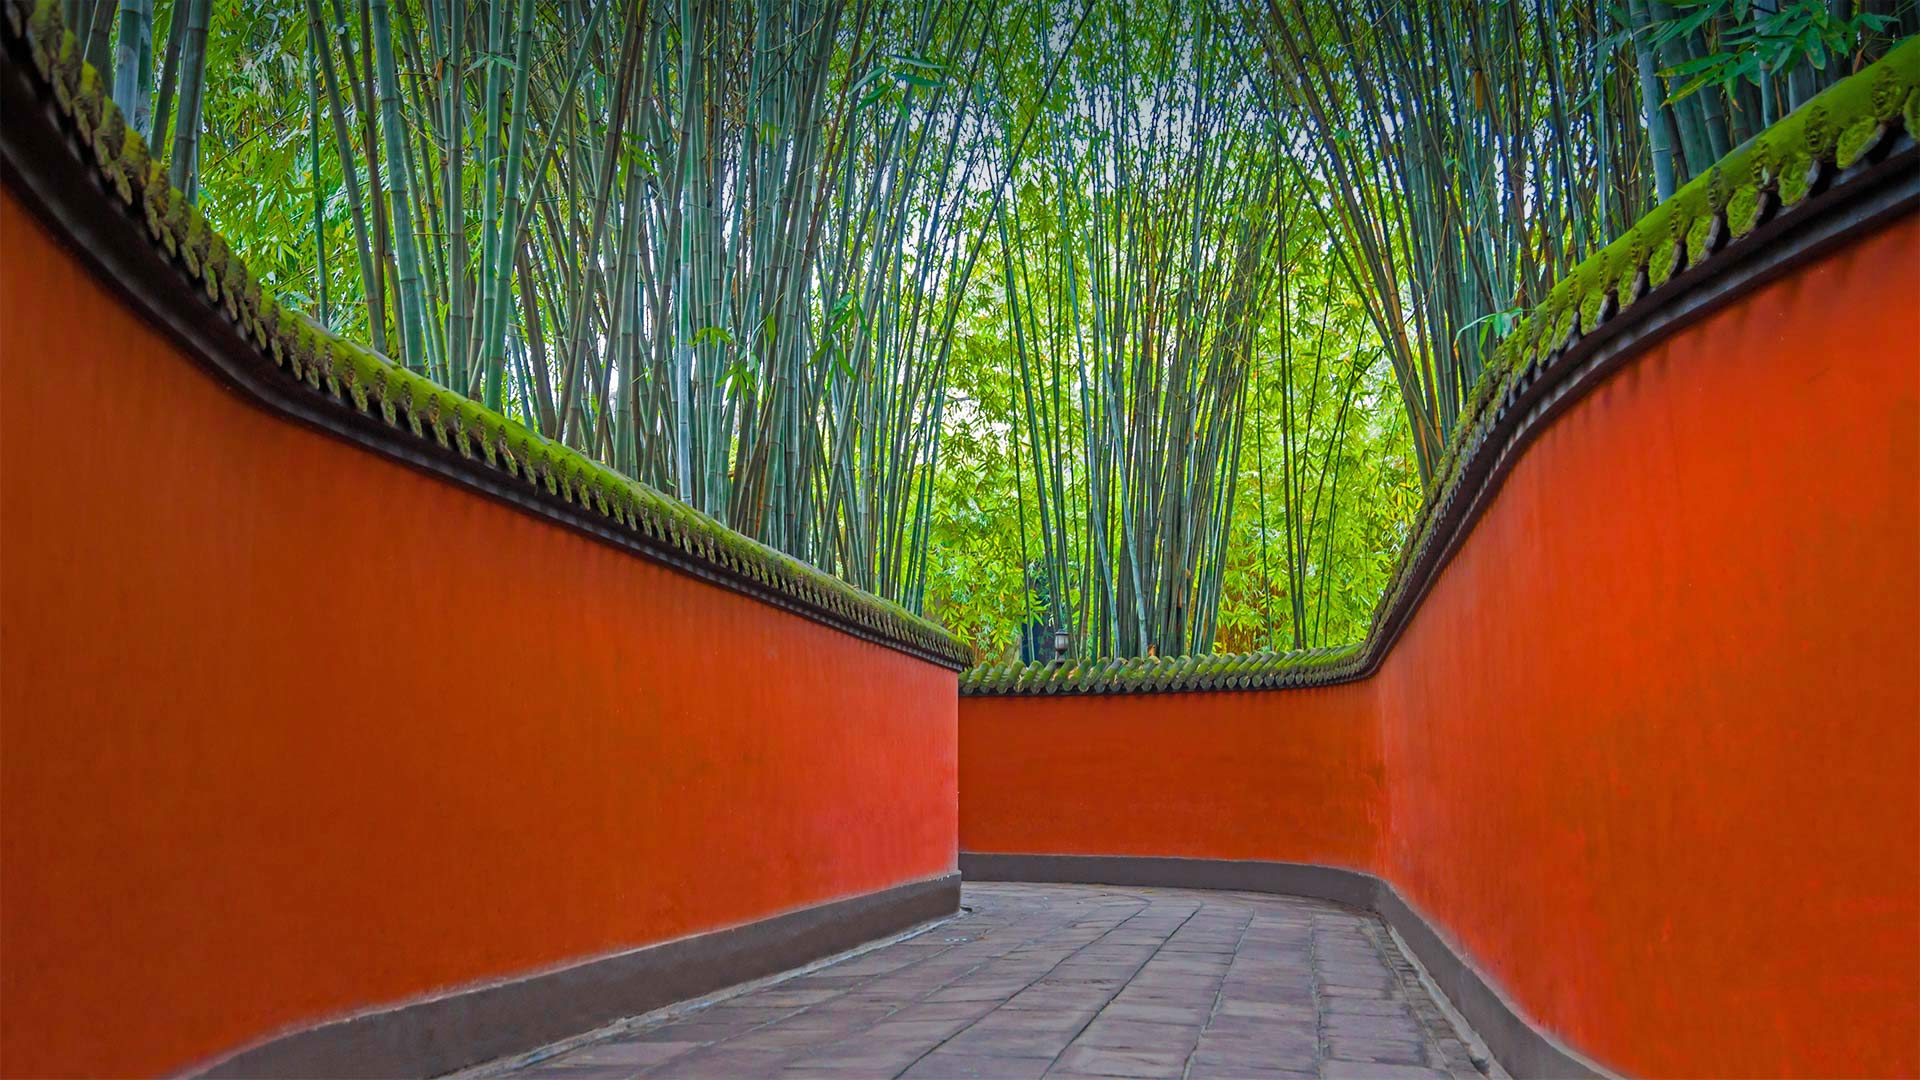 Alley and bamboo grove in Wuhou Temple, Chengdu, Sichuan province, China - Eastimages/Getty Images)